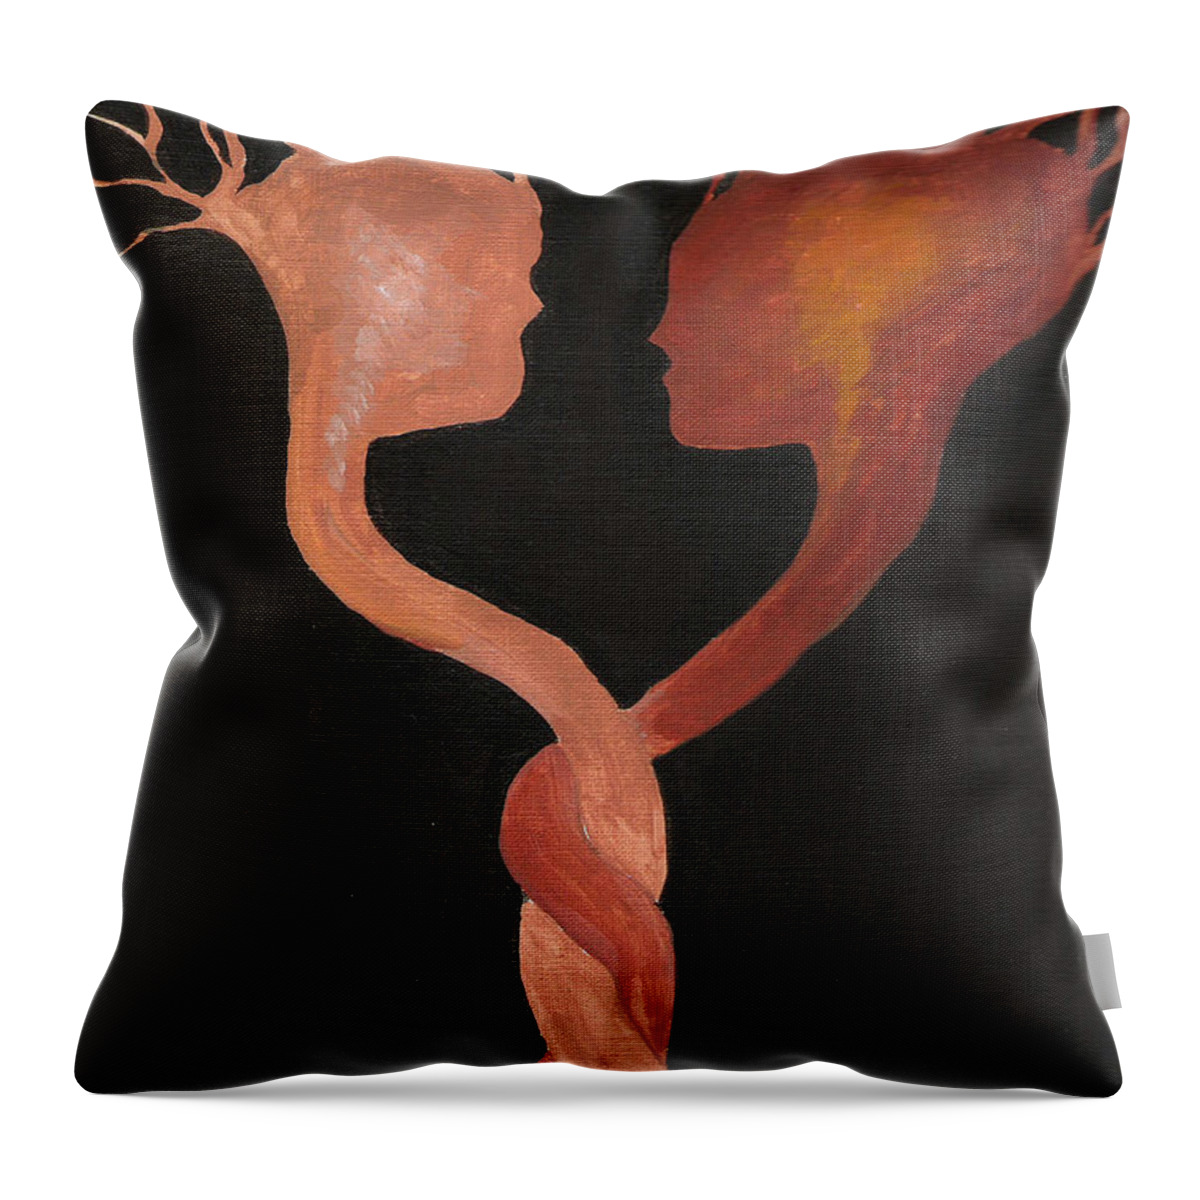 Figures Throw Pillow featuring the painting Twins by Pamela Henry